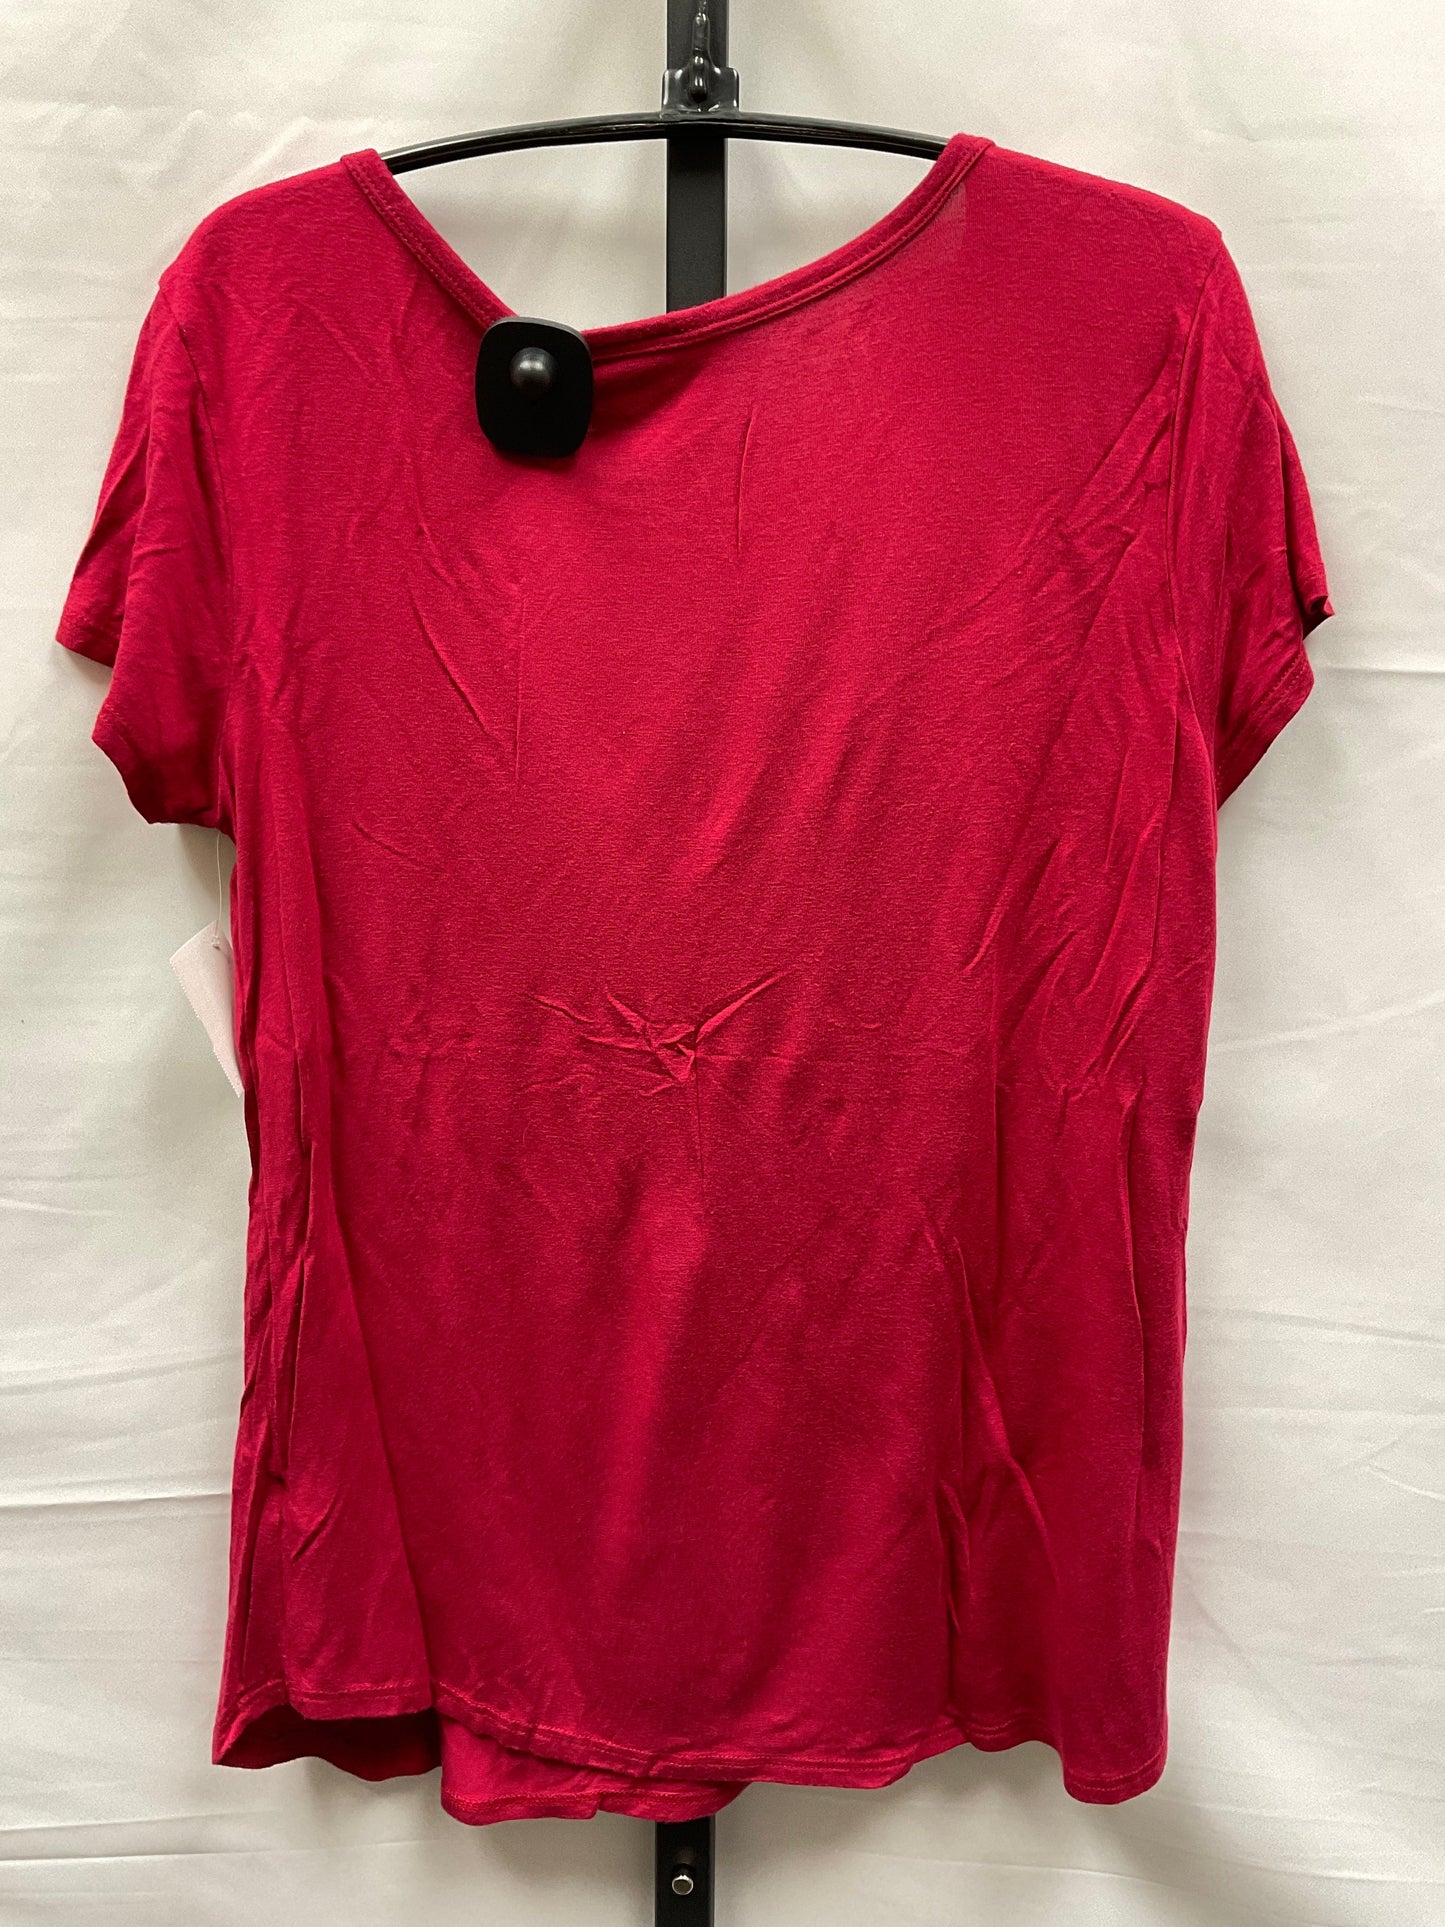 Red Top Short Sleeve Basic Mm Couture, Size M